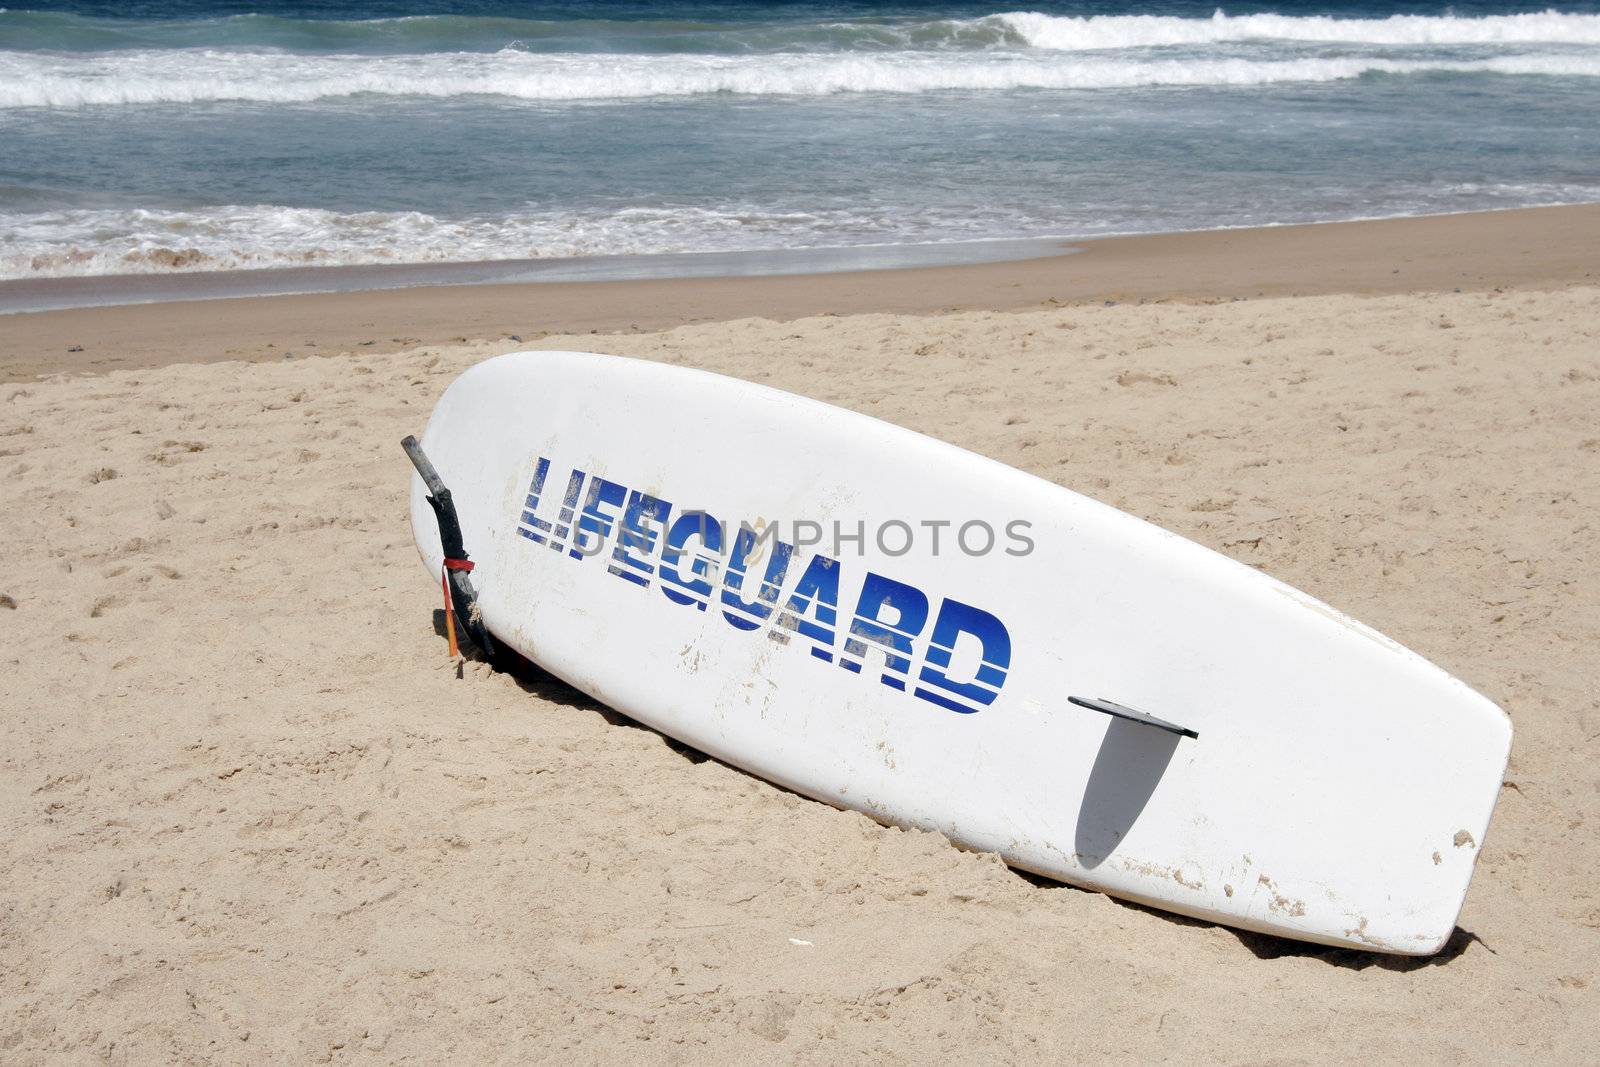 Lifeguard Rescue Surfboard by thorsten